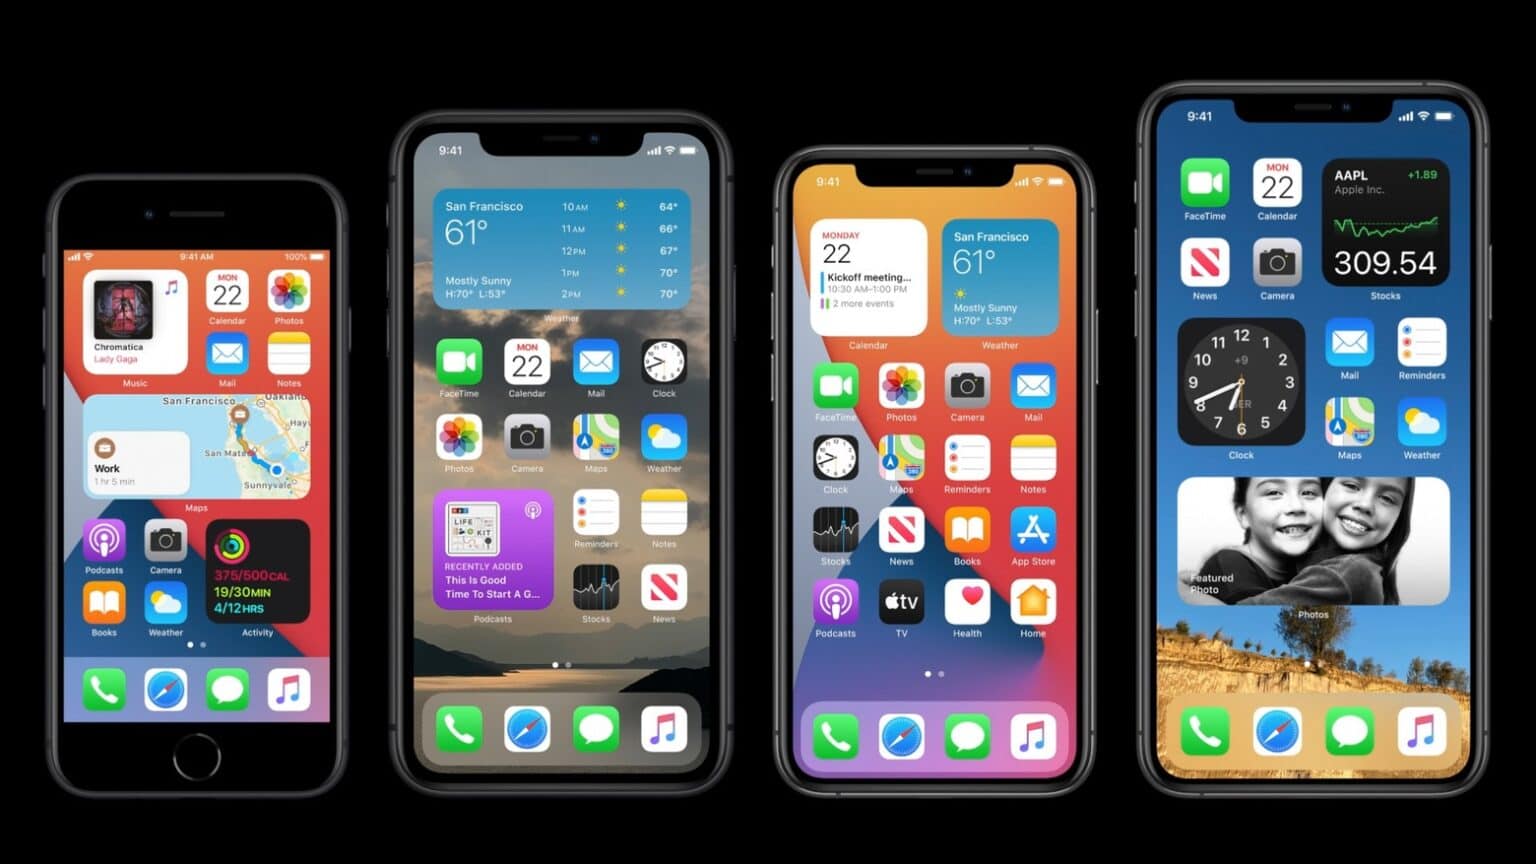 WWDC 2020 brought iOS 14 with iPhone home screen widgets, hurray!